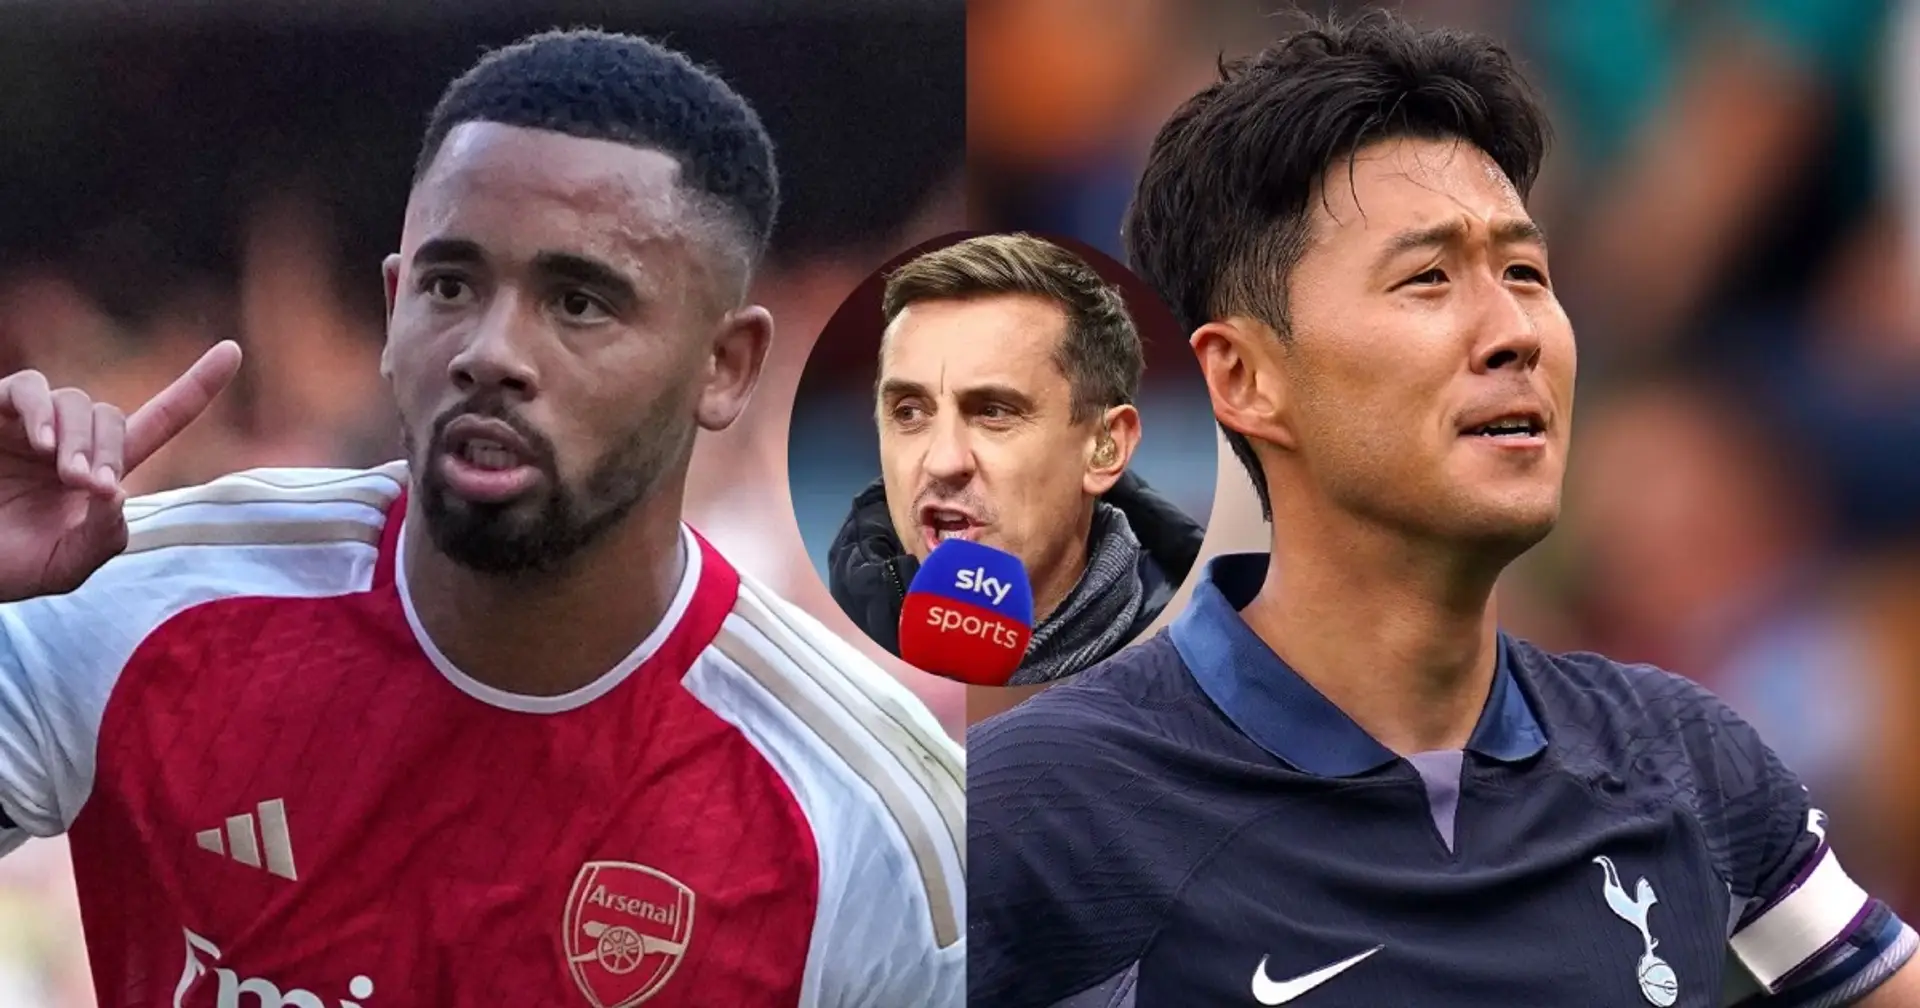 👉 Gary Neville tips Spurs to finish above Arsenal & 2 more big stories you might've missed